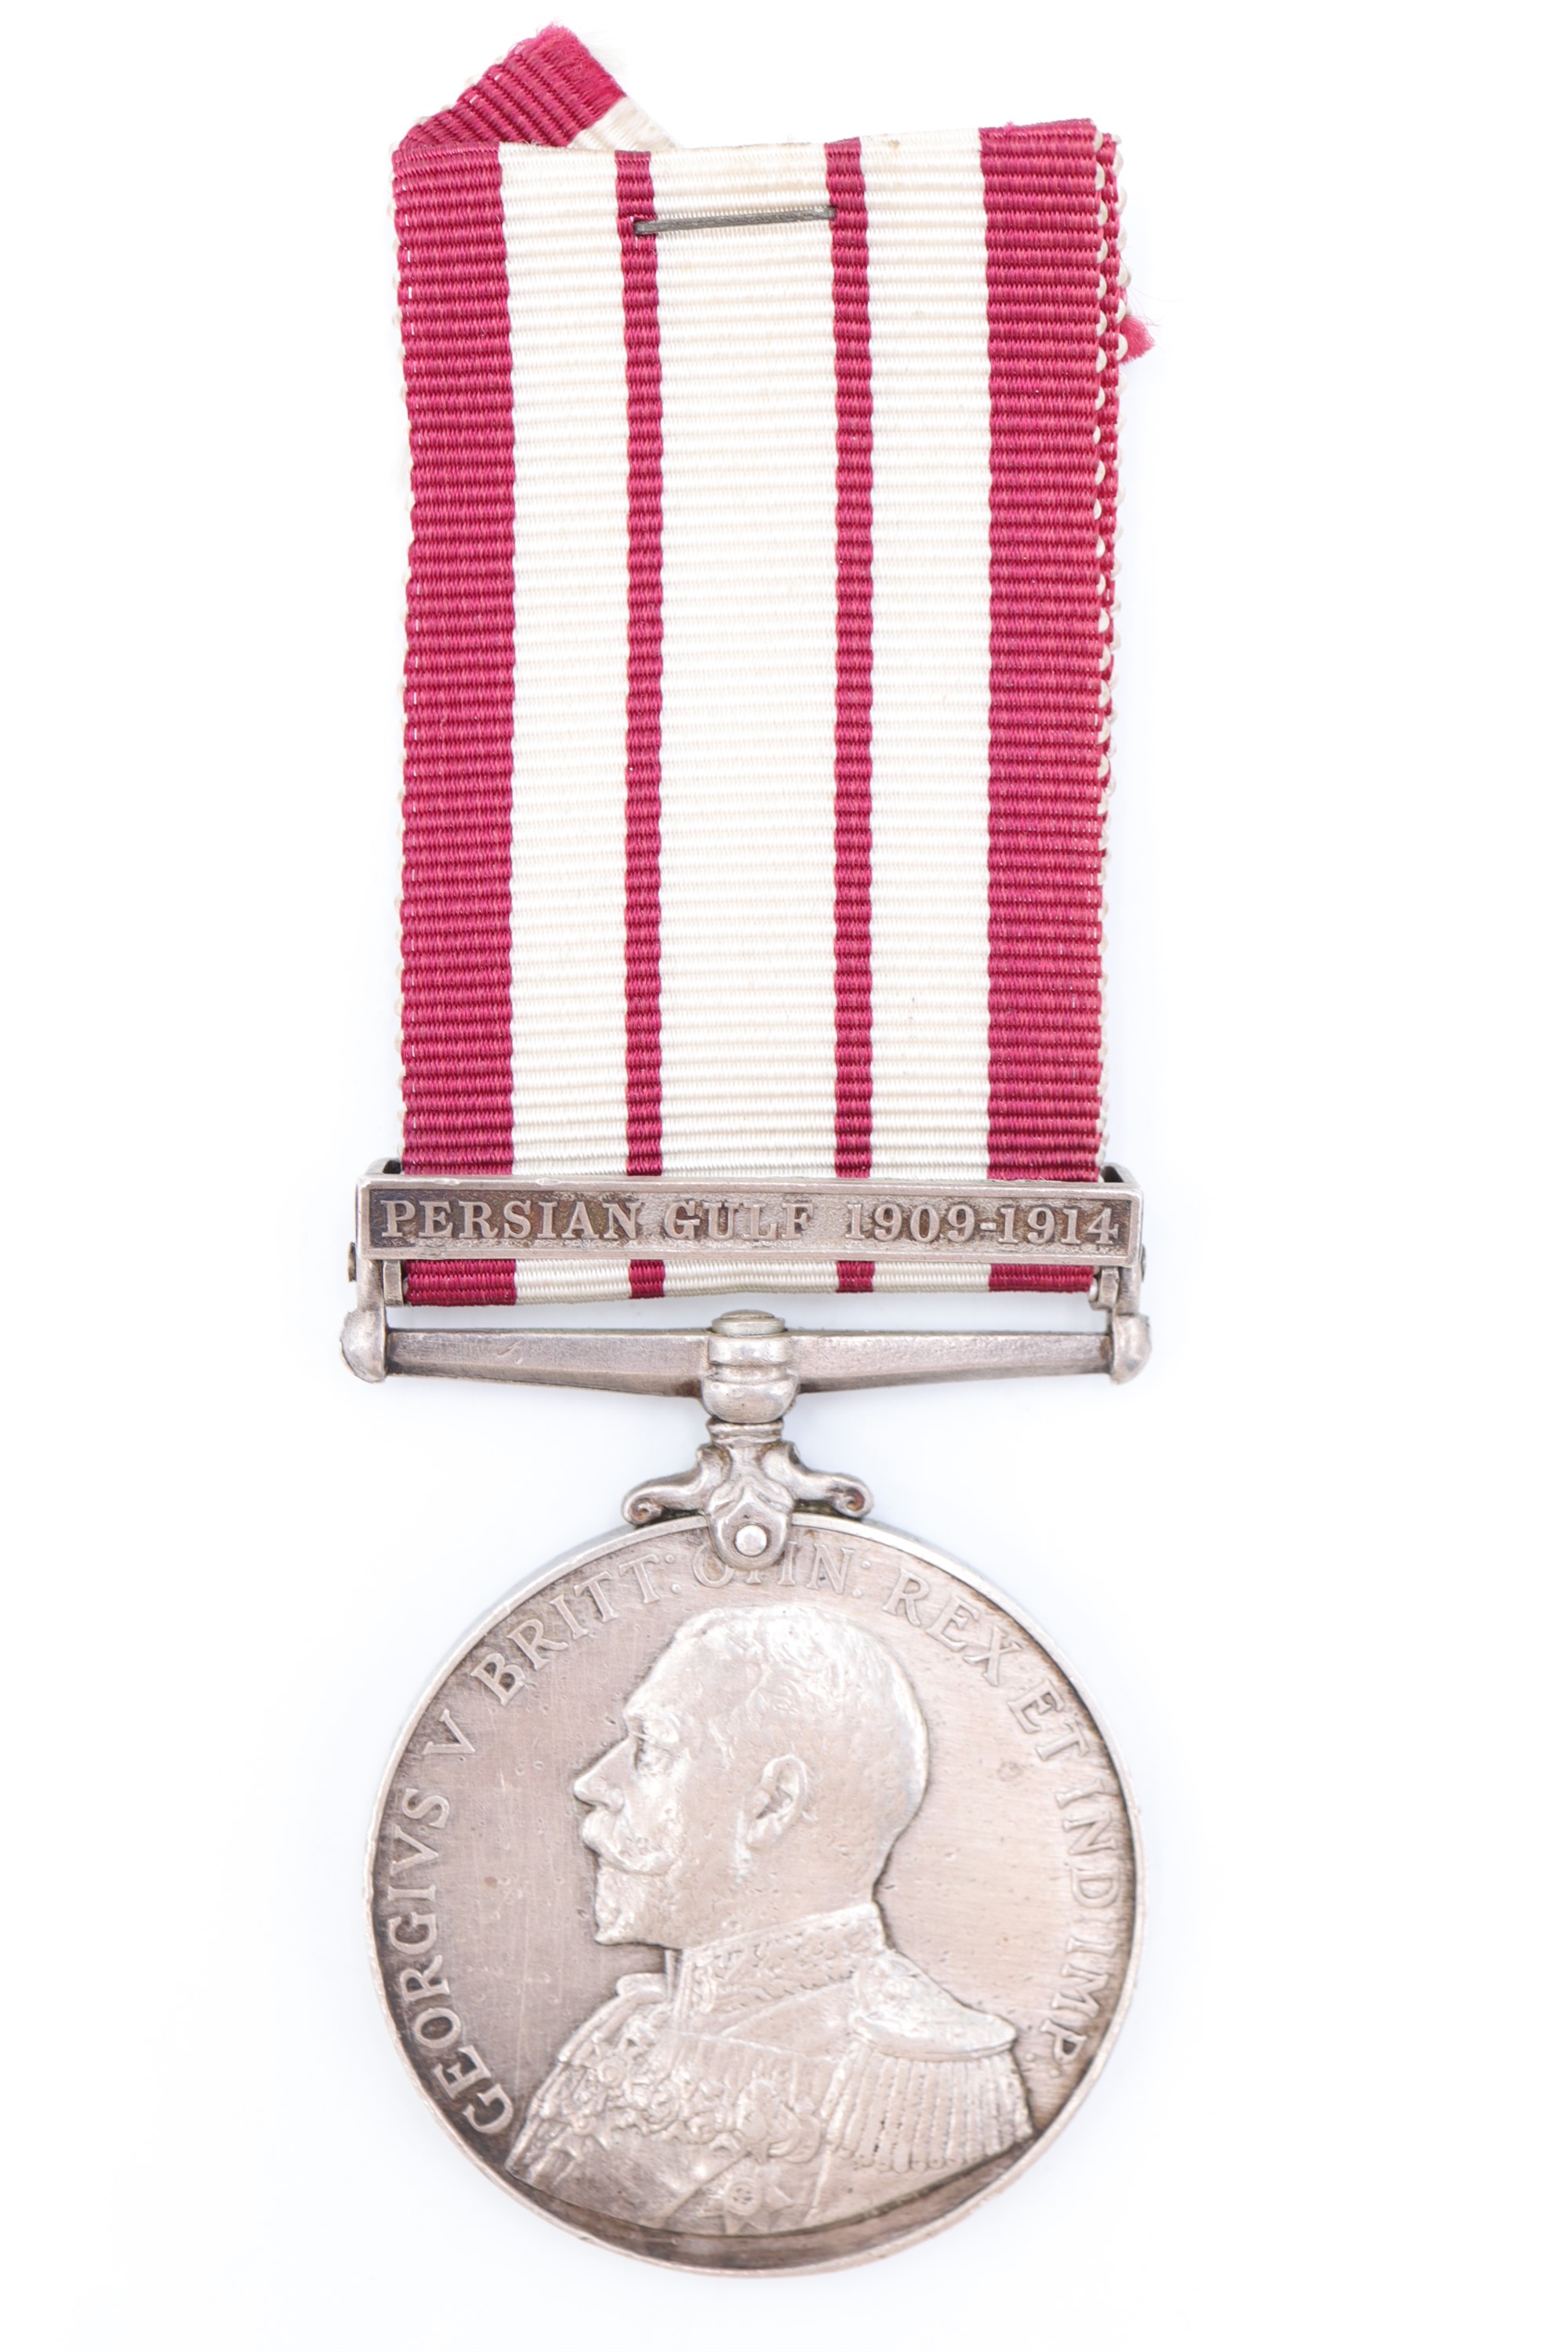 A Naval General Service Medal with Persian Gulf 1909 - 1914 clasp to 310166 S Atwill, Lg Sto, HMS